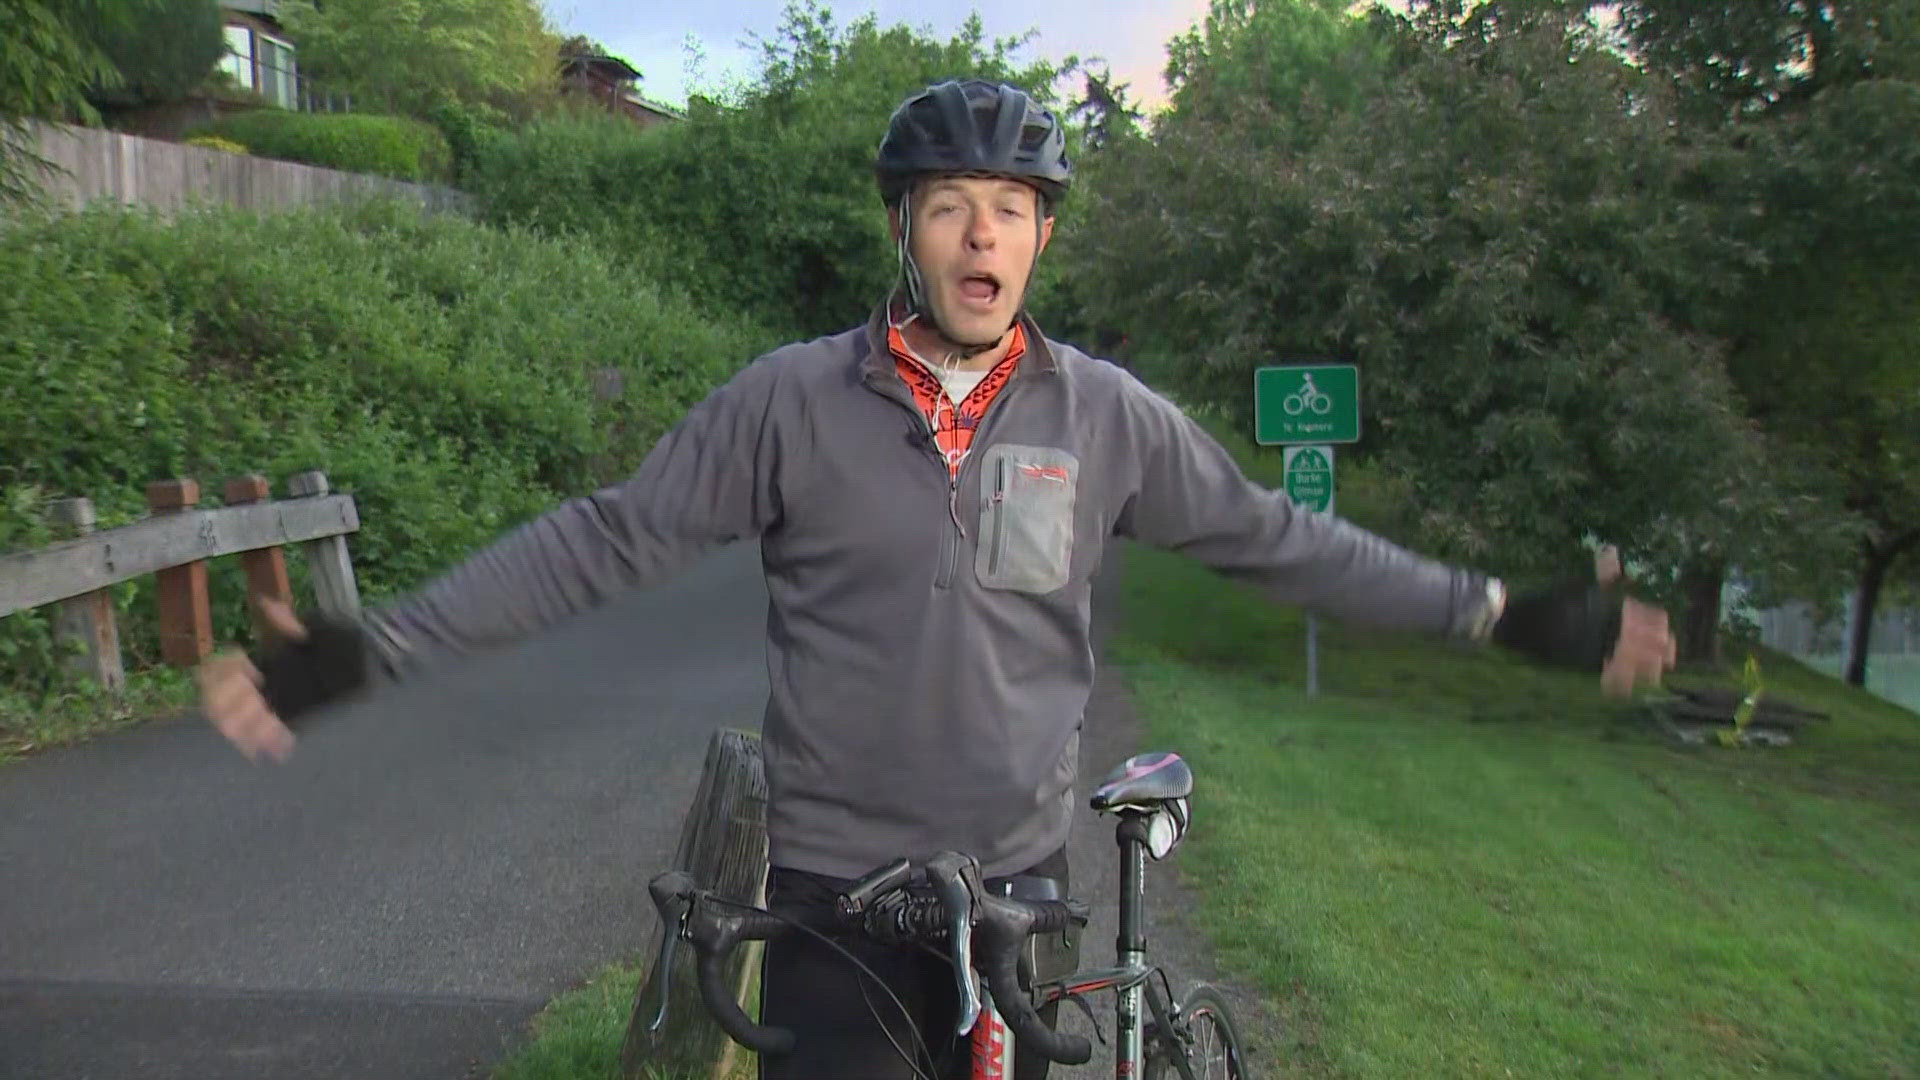 KING 5 Anchor Jake Whittenberg rode his bike to the studio, to encourage everyone to get out and enjoy the trails